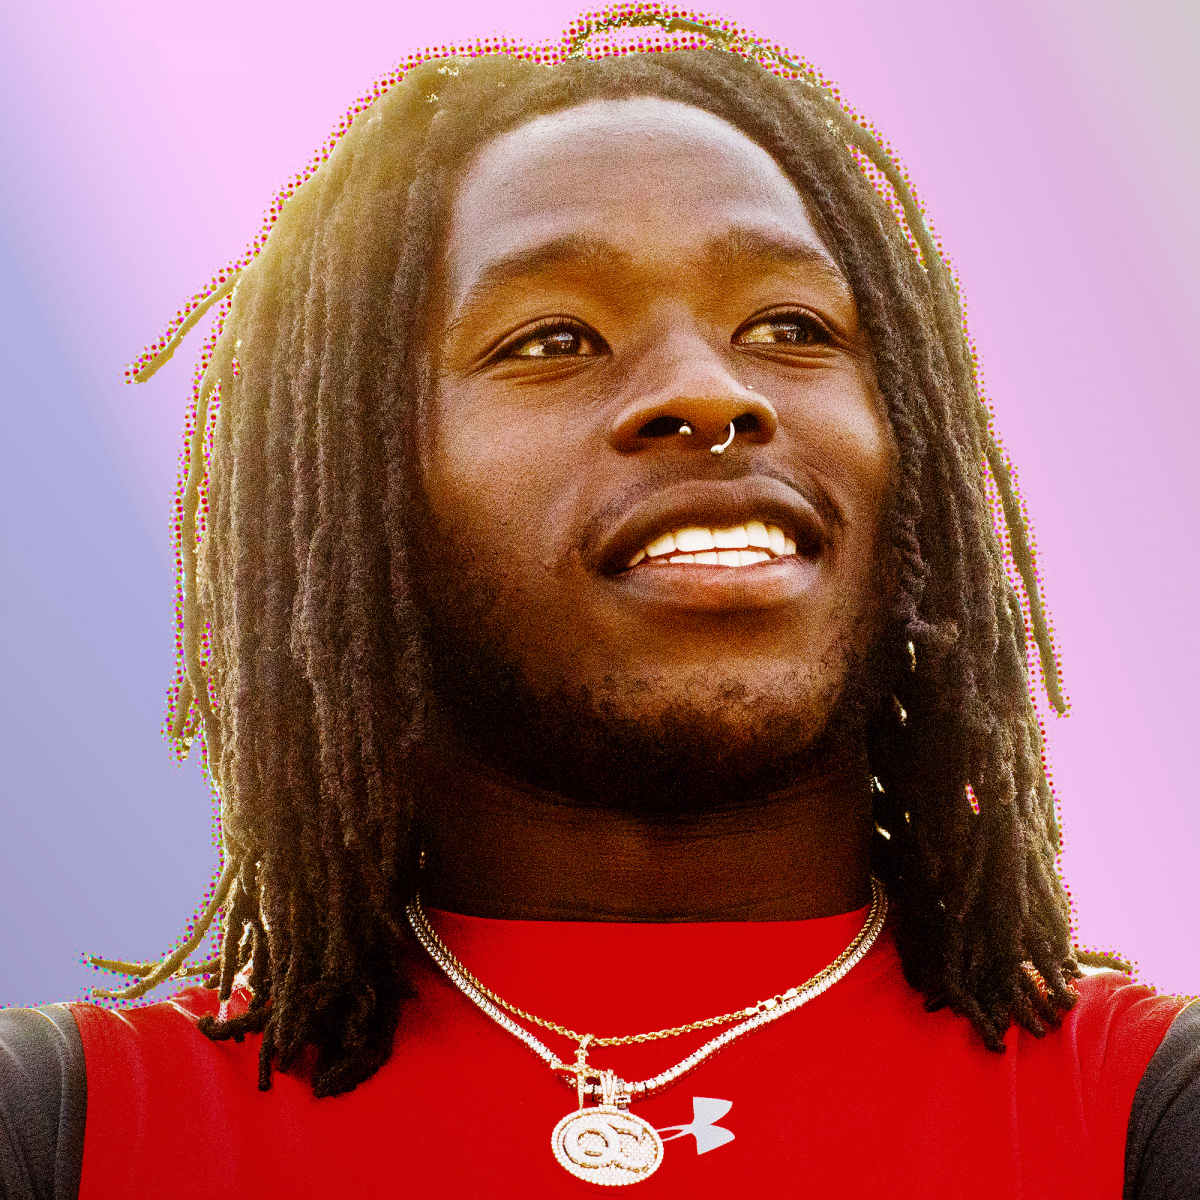 Alvin Kamara Oc Necklace Meaning - Buy from many sellers and get your cards all in one shipment ...